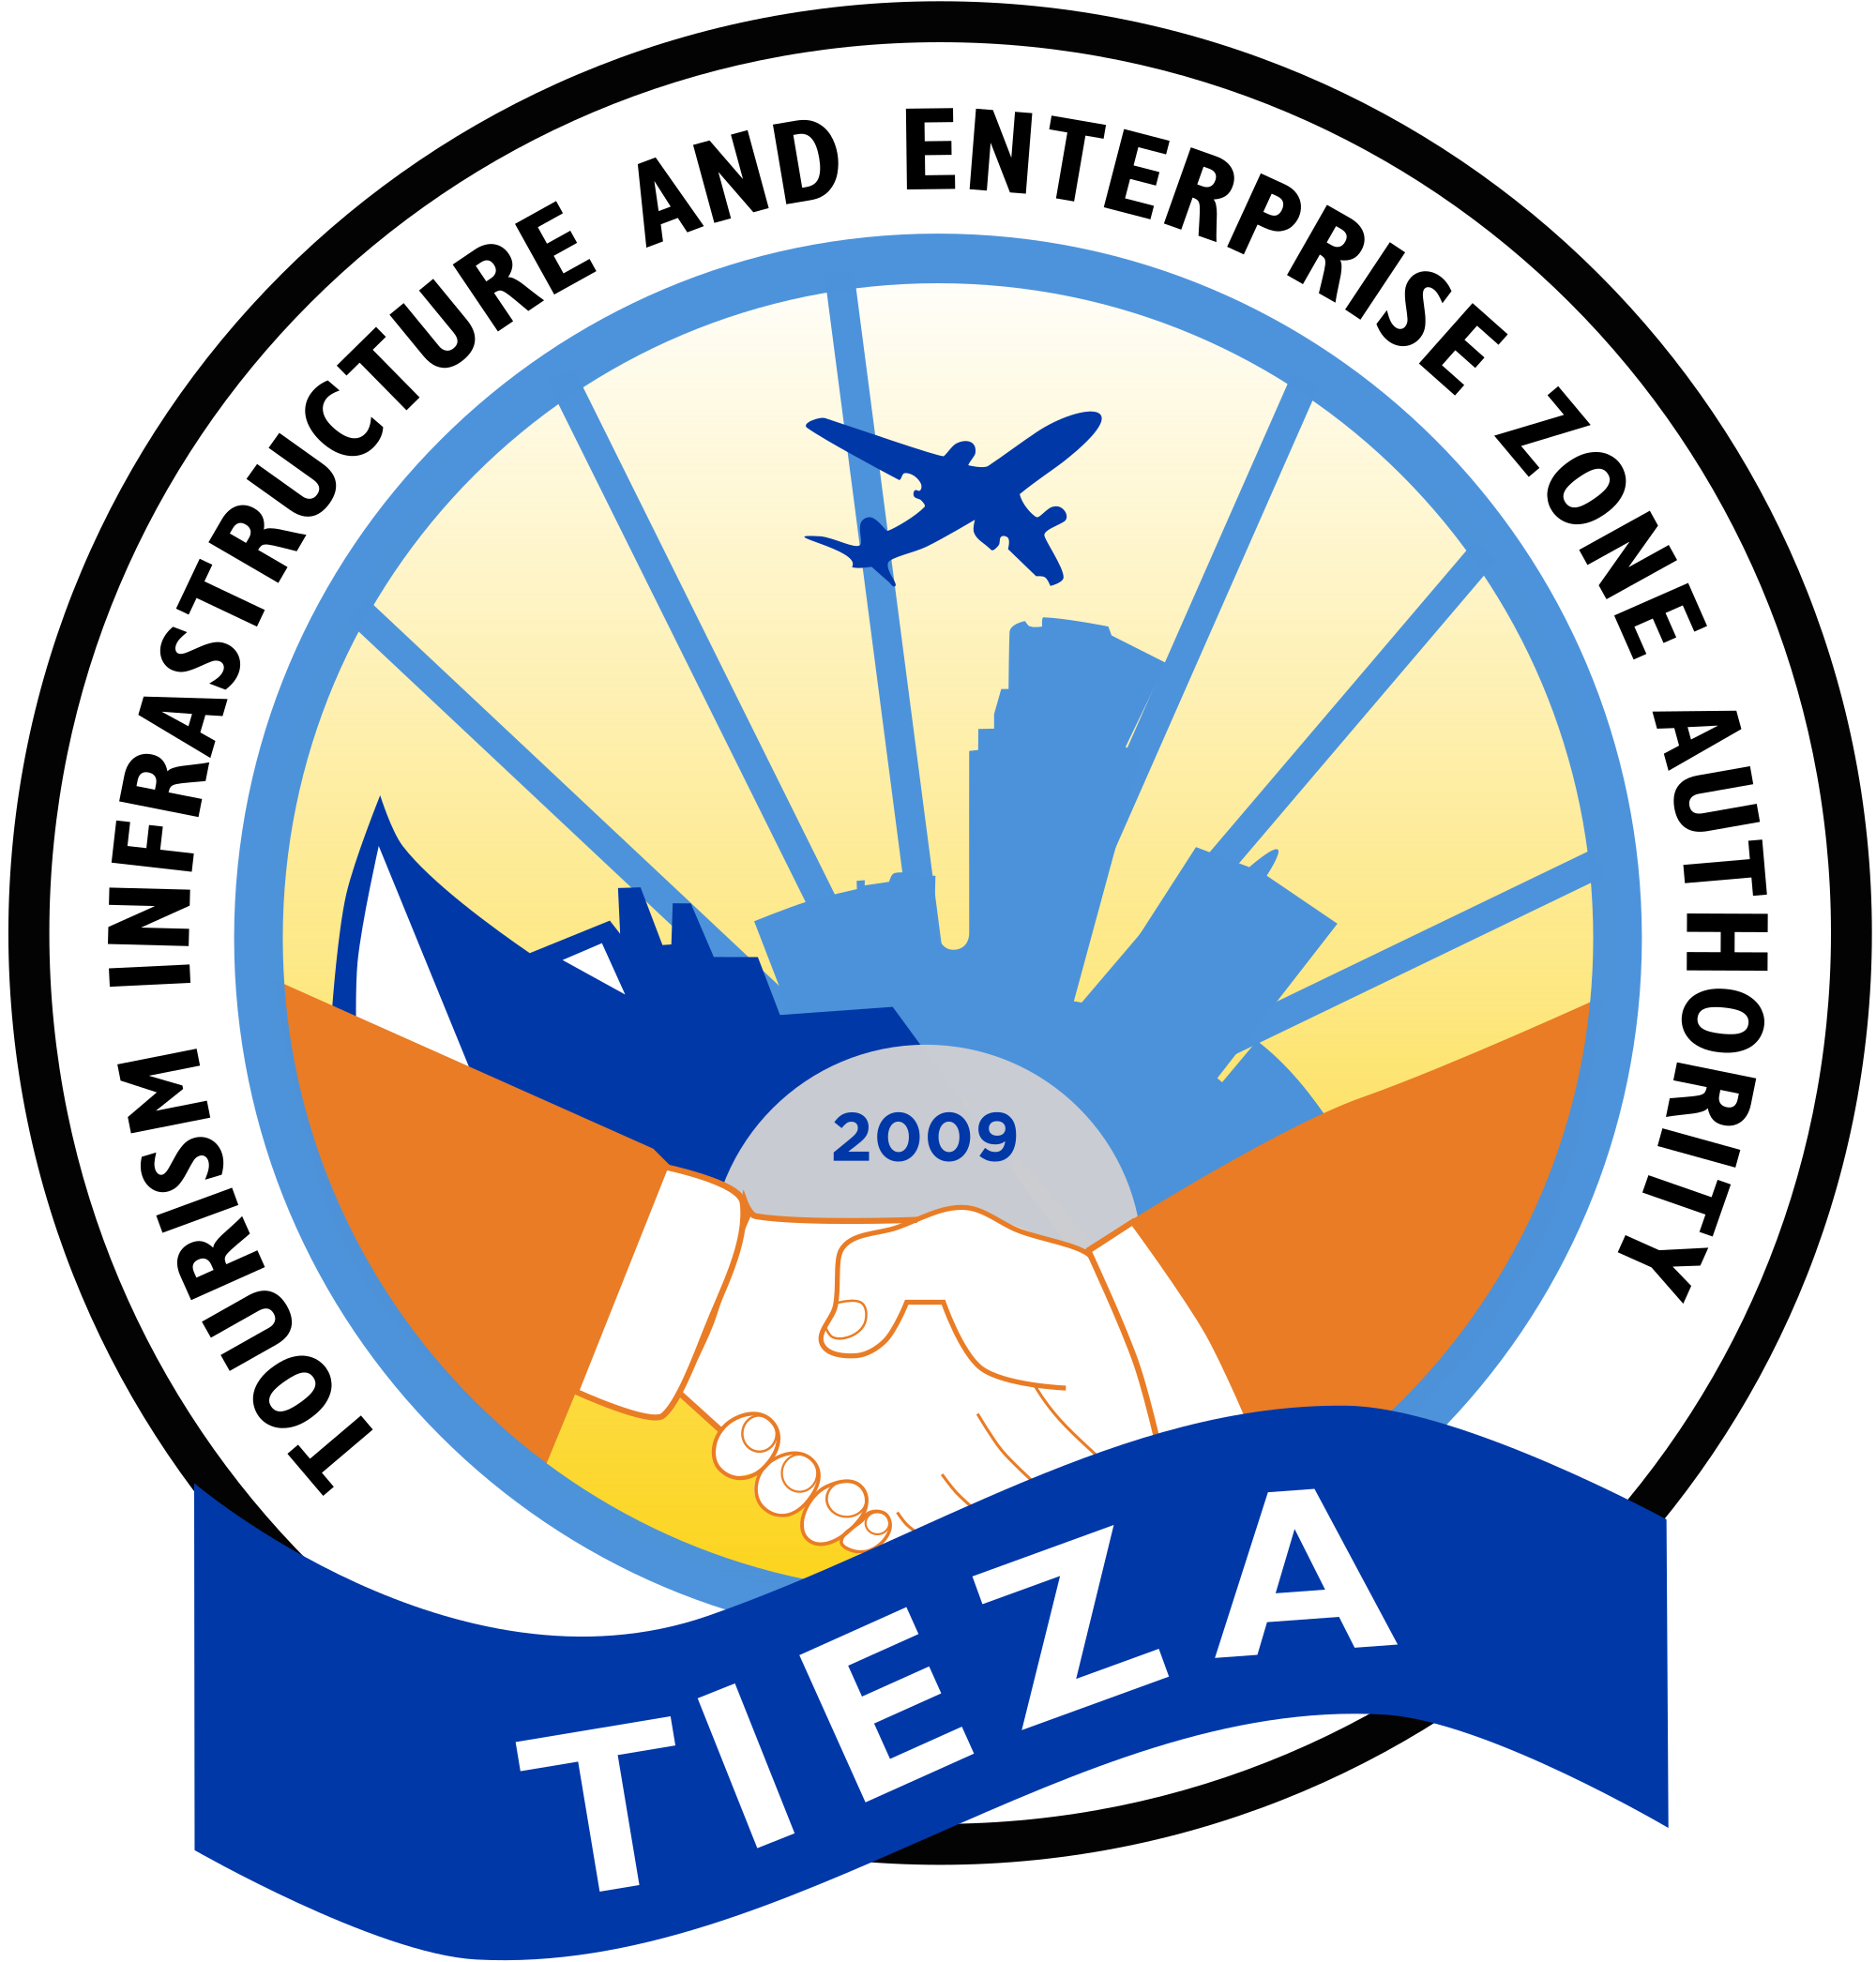 tourism infrastructure and enterprise zone authority functions